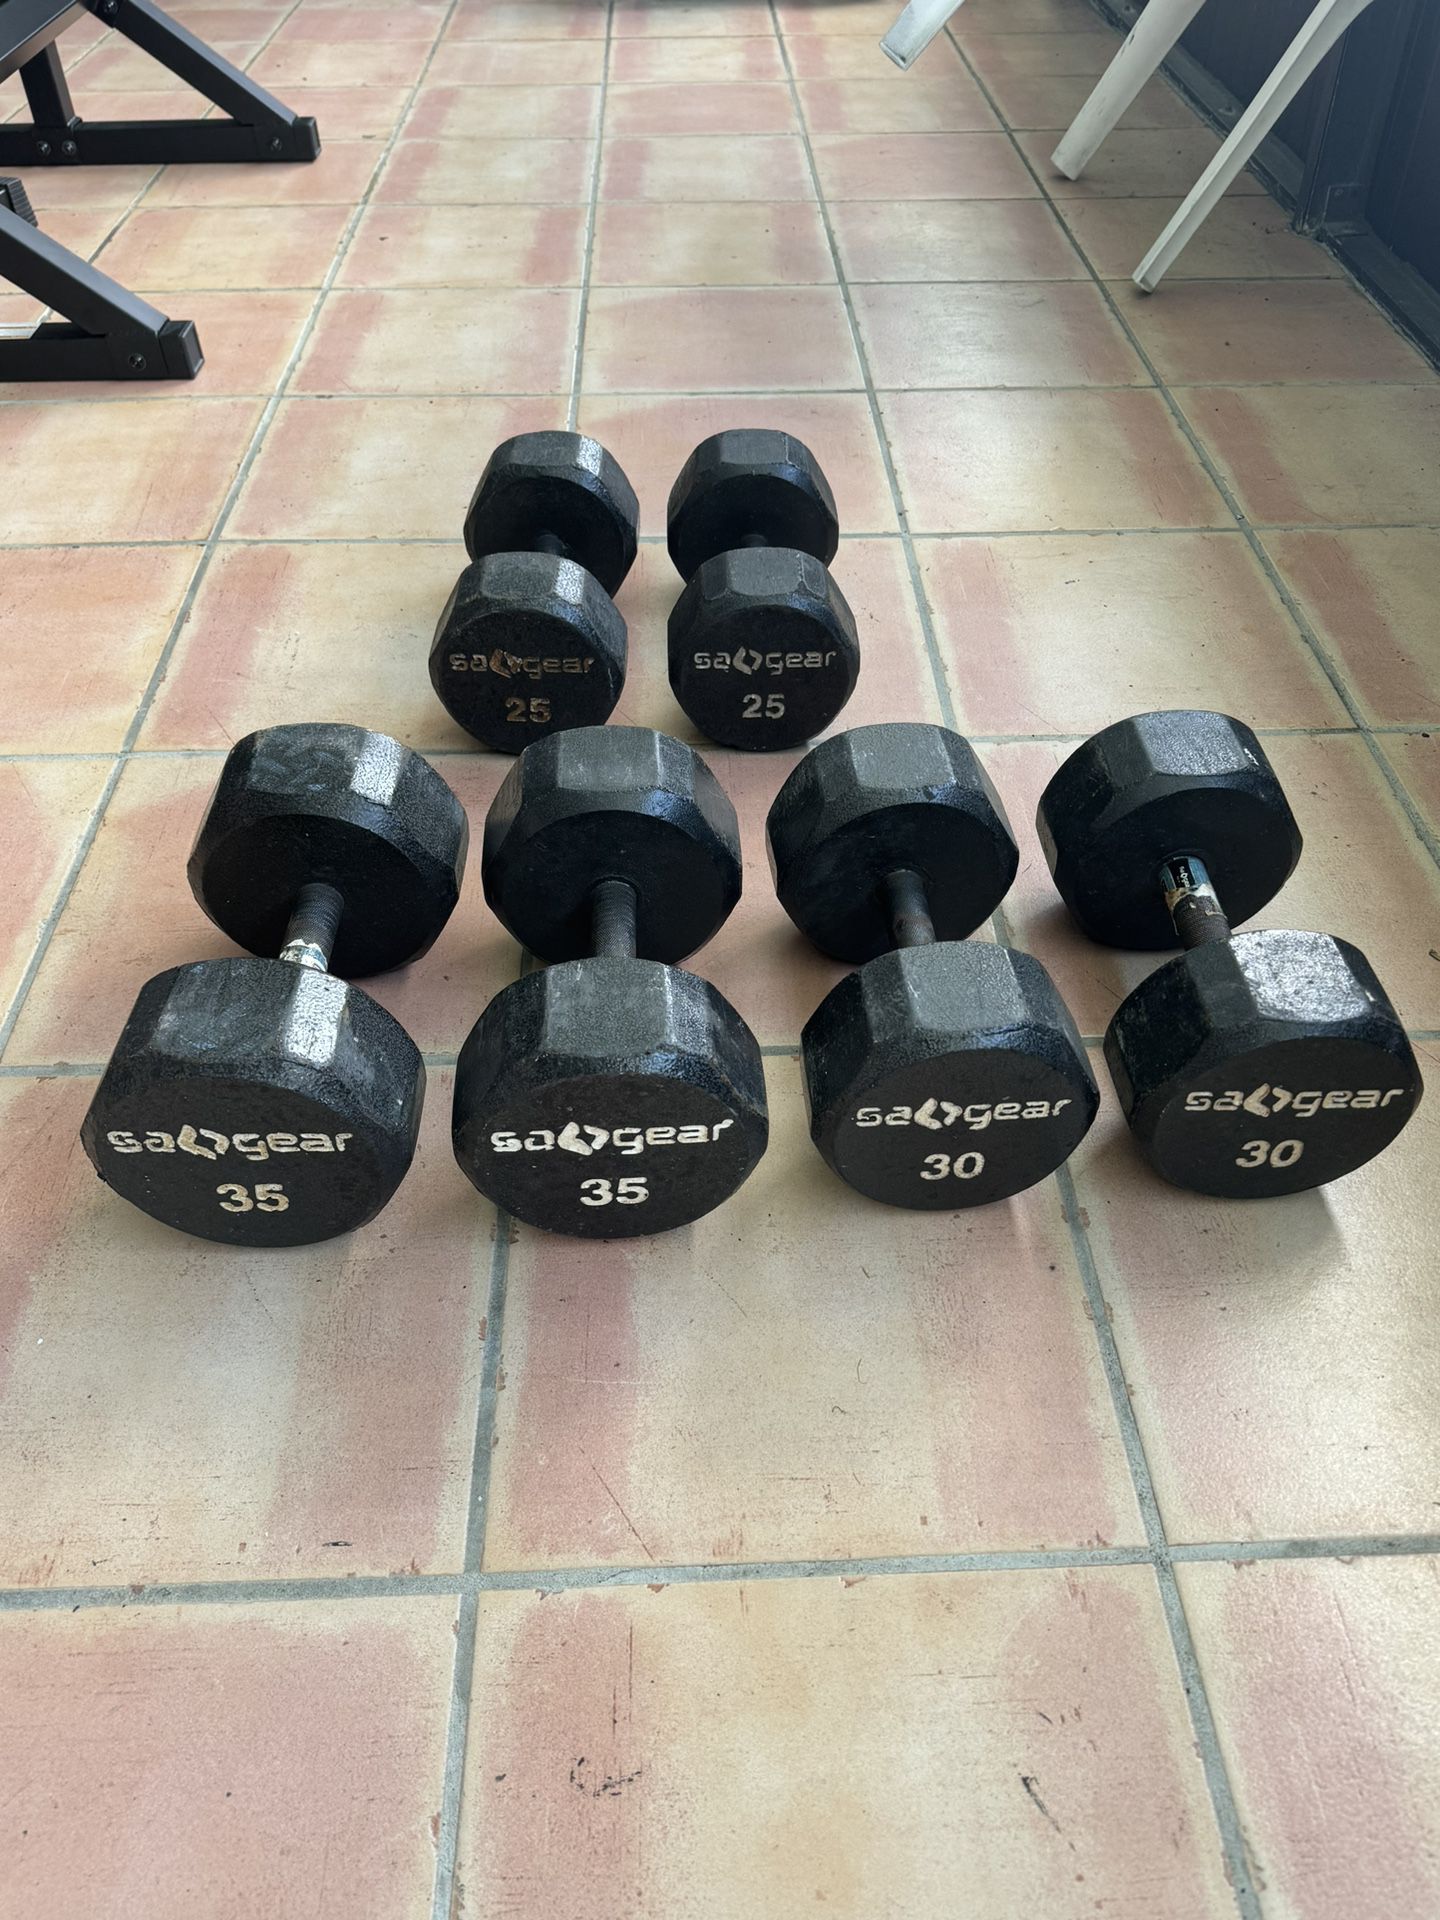 Three Sets of dumbells. 25lbs, 30lbs and 35lbs. 